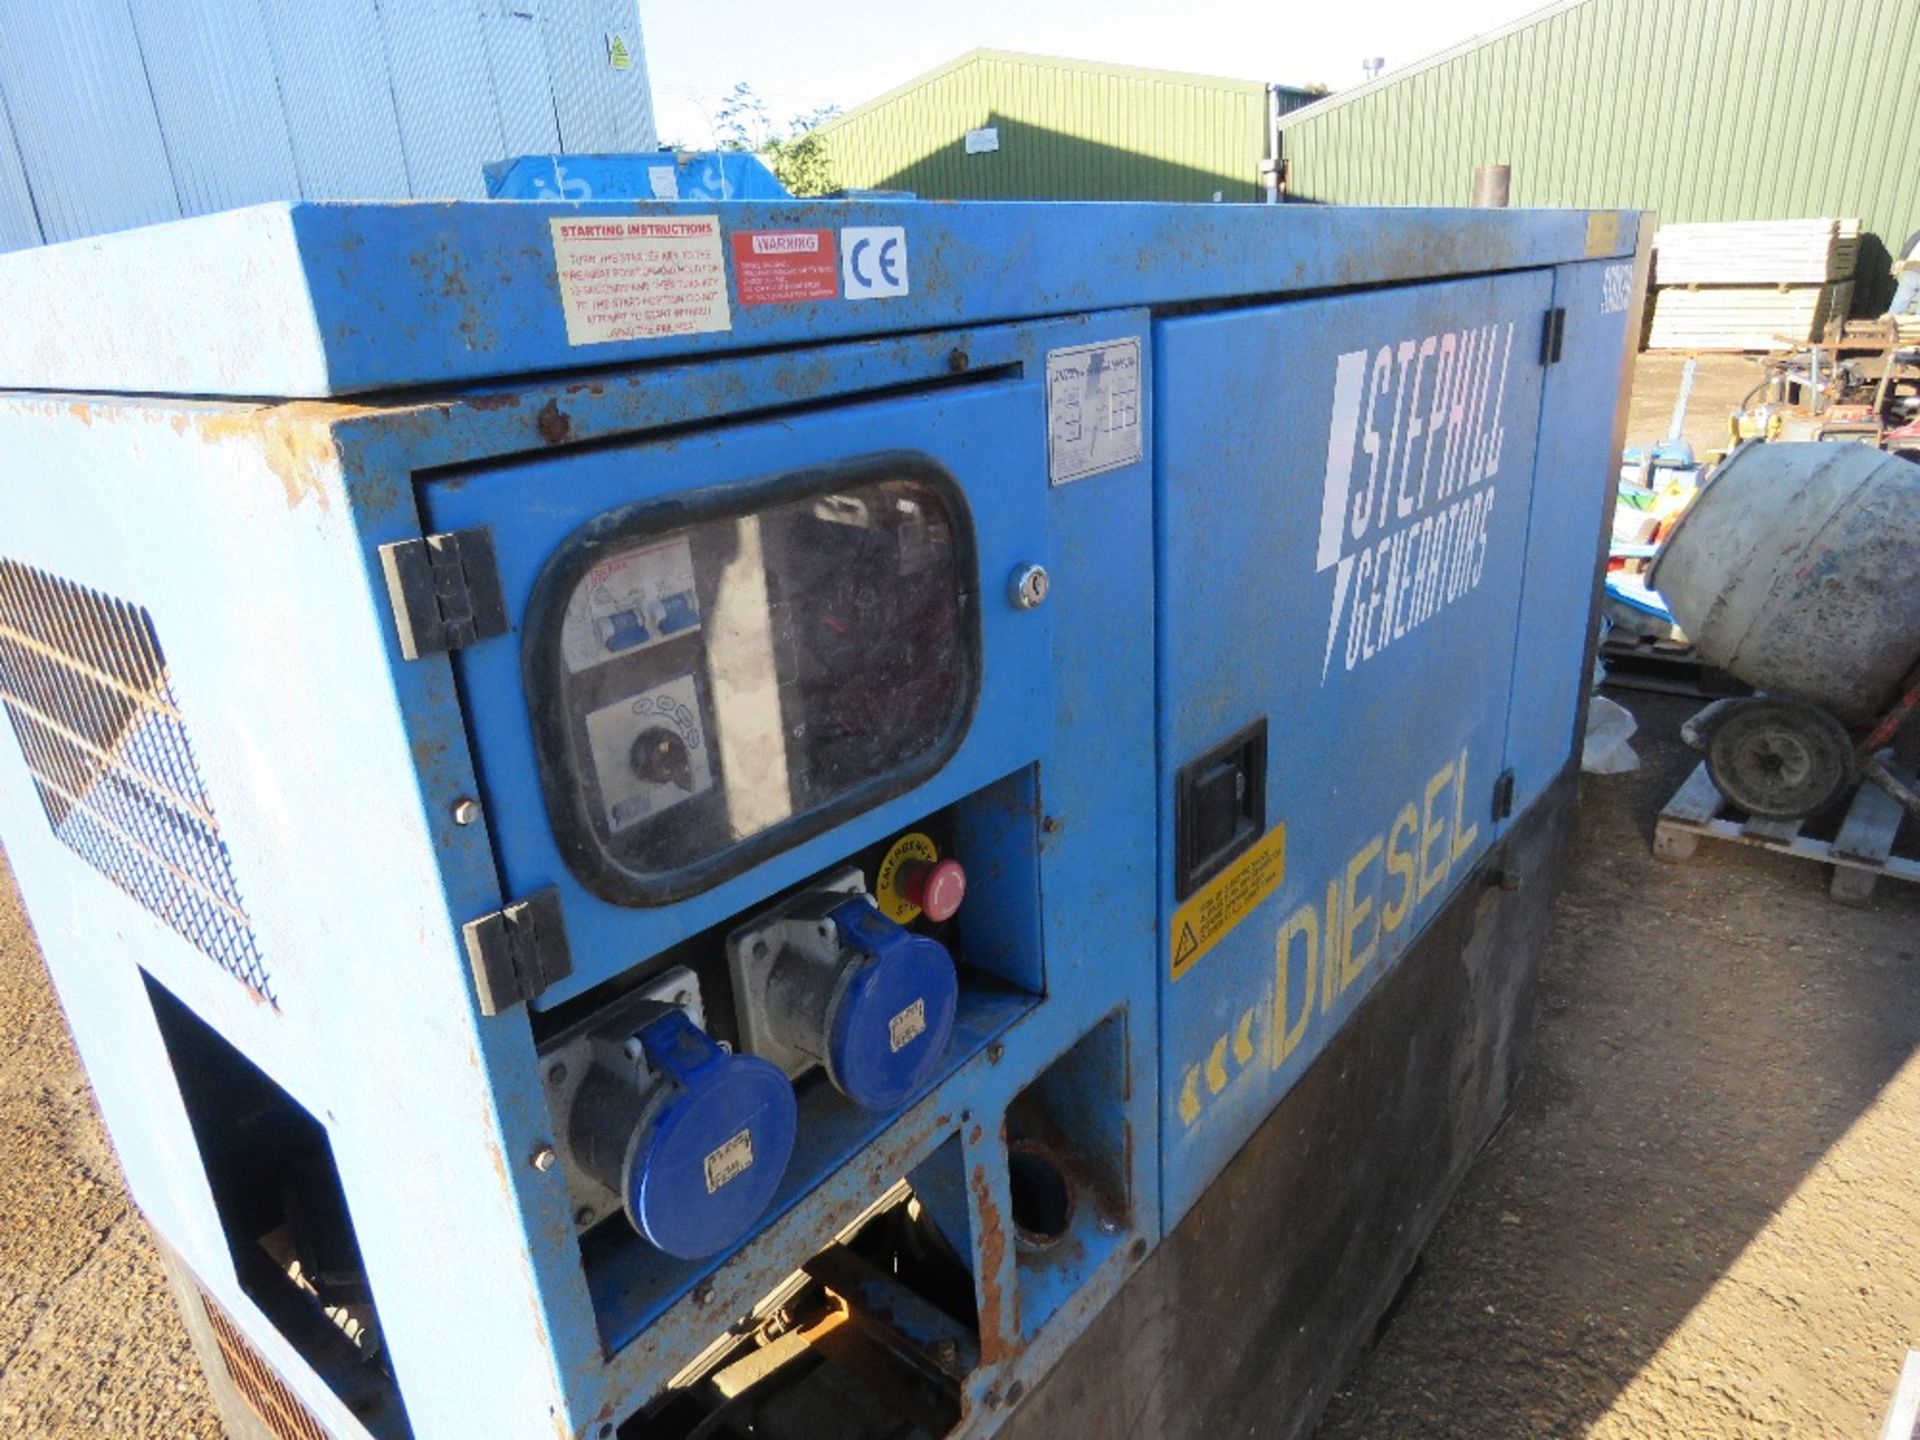 STEPHILL SSDX20 GENERATOR SET, ISUZU ENGINE, PARTS MISSING, SPARES/REPAIR. THIS LOT IS SOLD UNDER T - Image 6 of 8